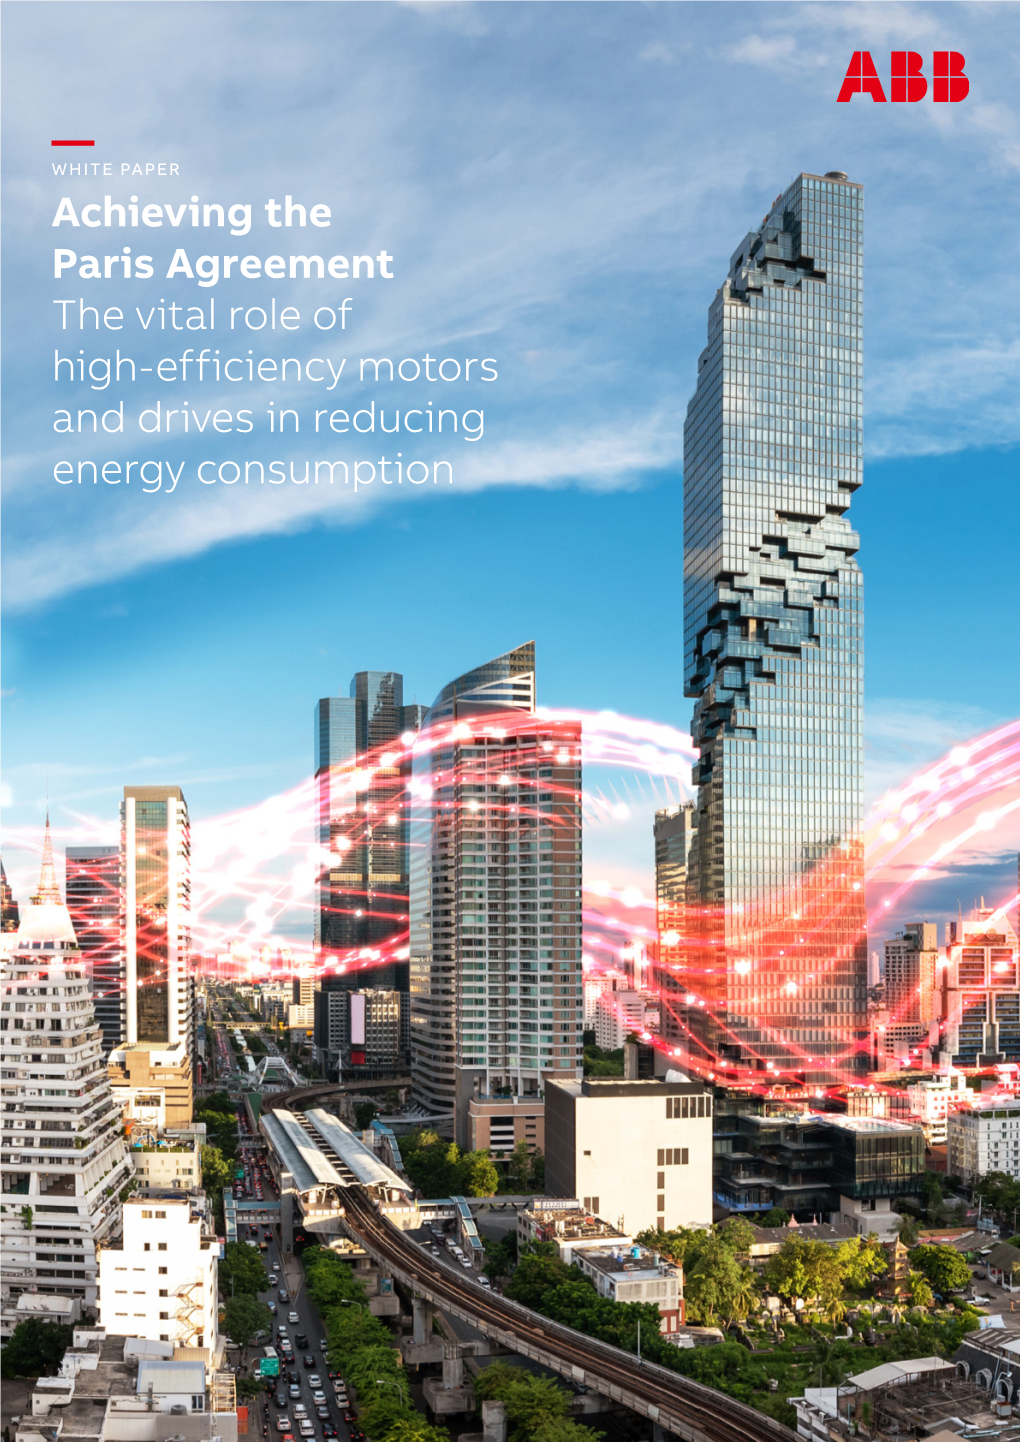 — Achieving the Paris Agreement the Vital Role of High-Efficiency Motors